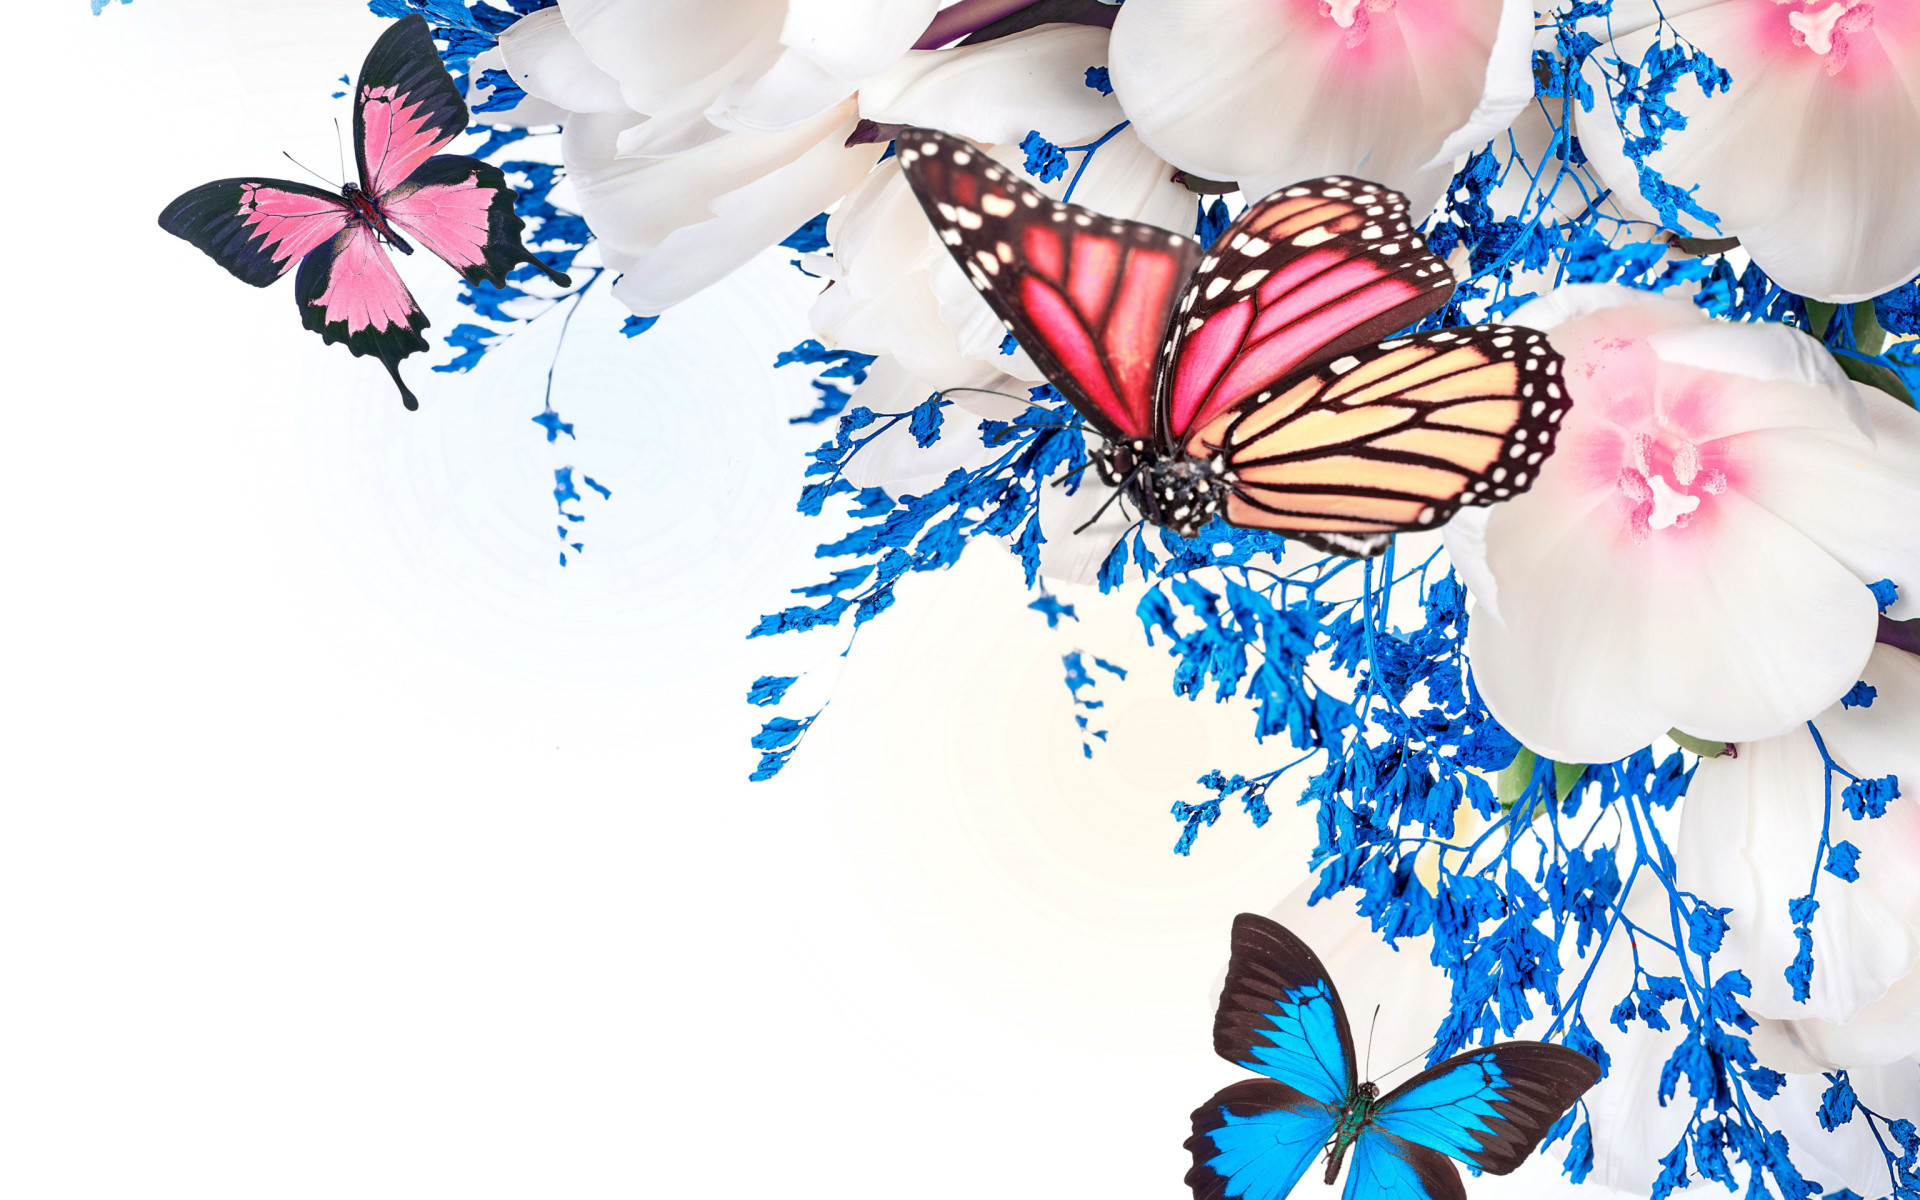 Exquisite Butterfly desktop backgrounds for delicate beauty